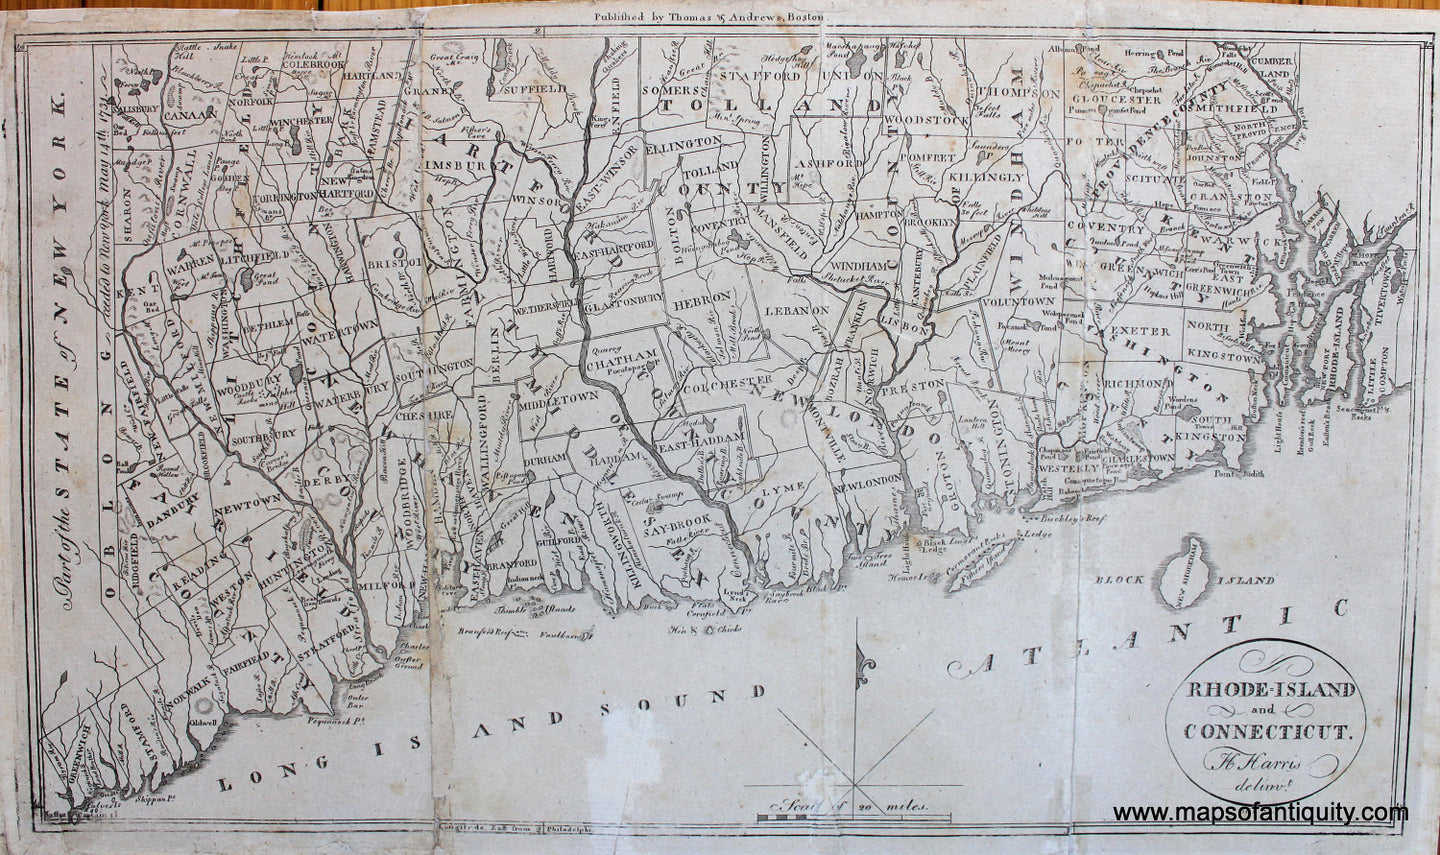 Black-and-White-Antique-Map-Rhode-Island-and-Connecticut-**********-United-States-Northeast-1796-Morse-Maps-Of-Antiquity